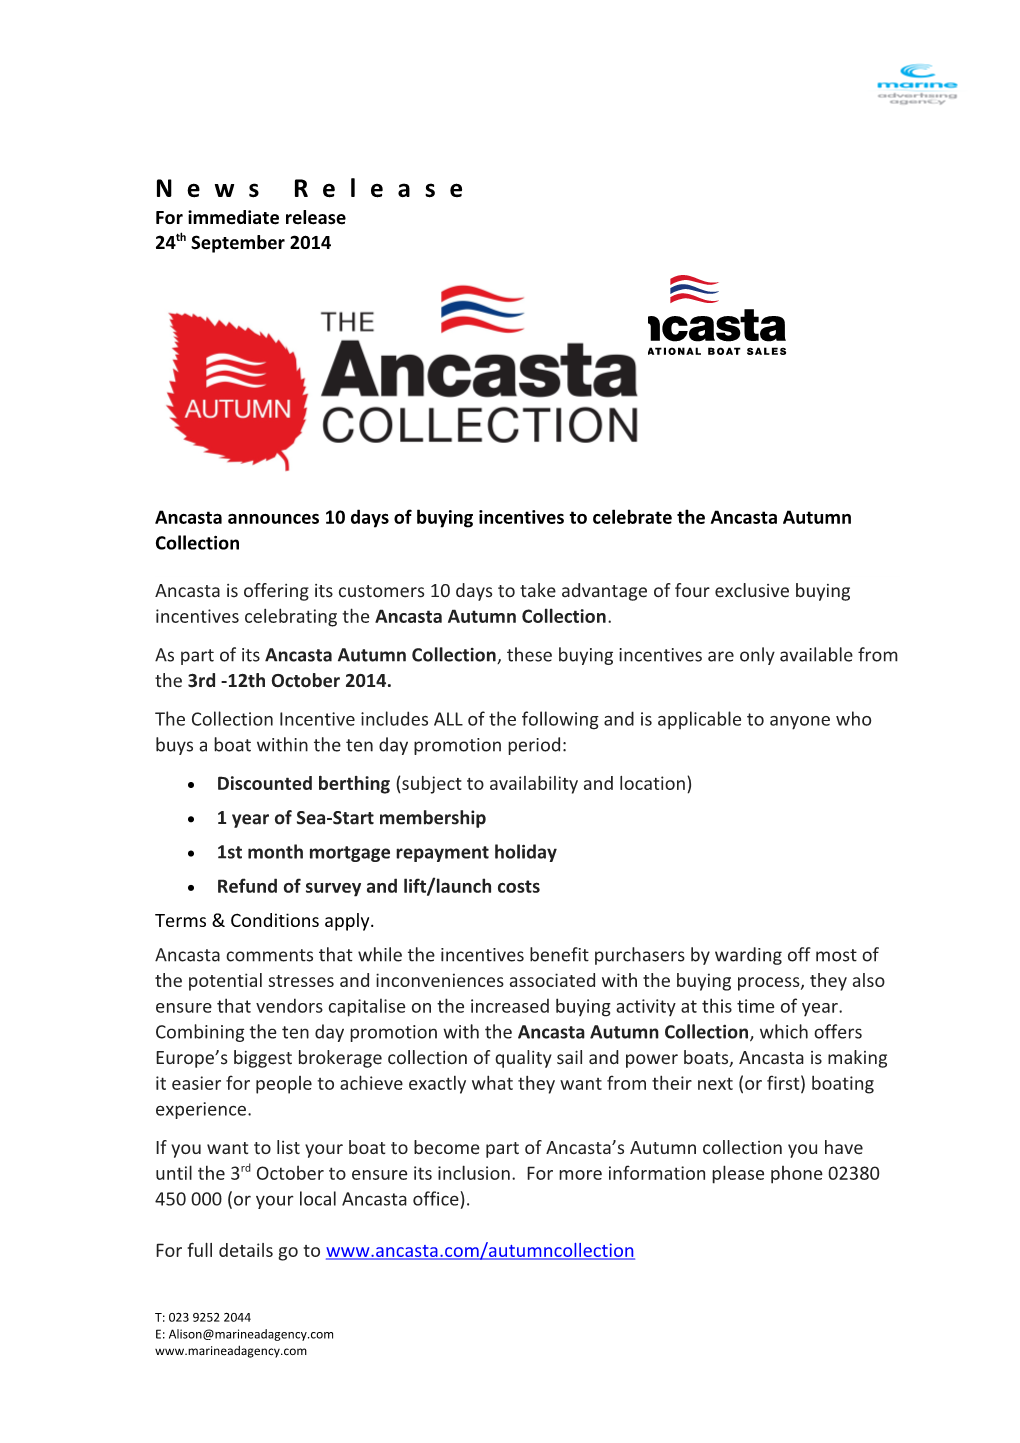 Ancasta Announces 10 Days of Buying Incentives to Celebrate the Ancastaautumn Collection